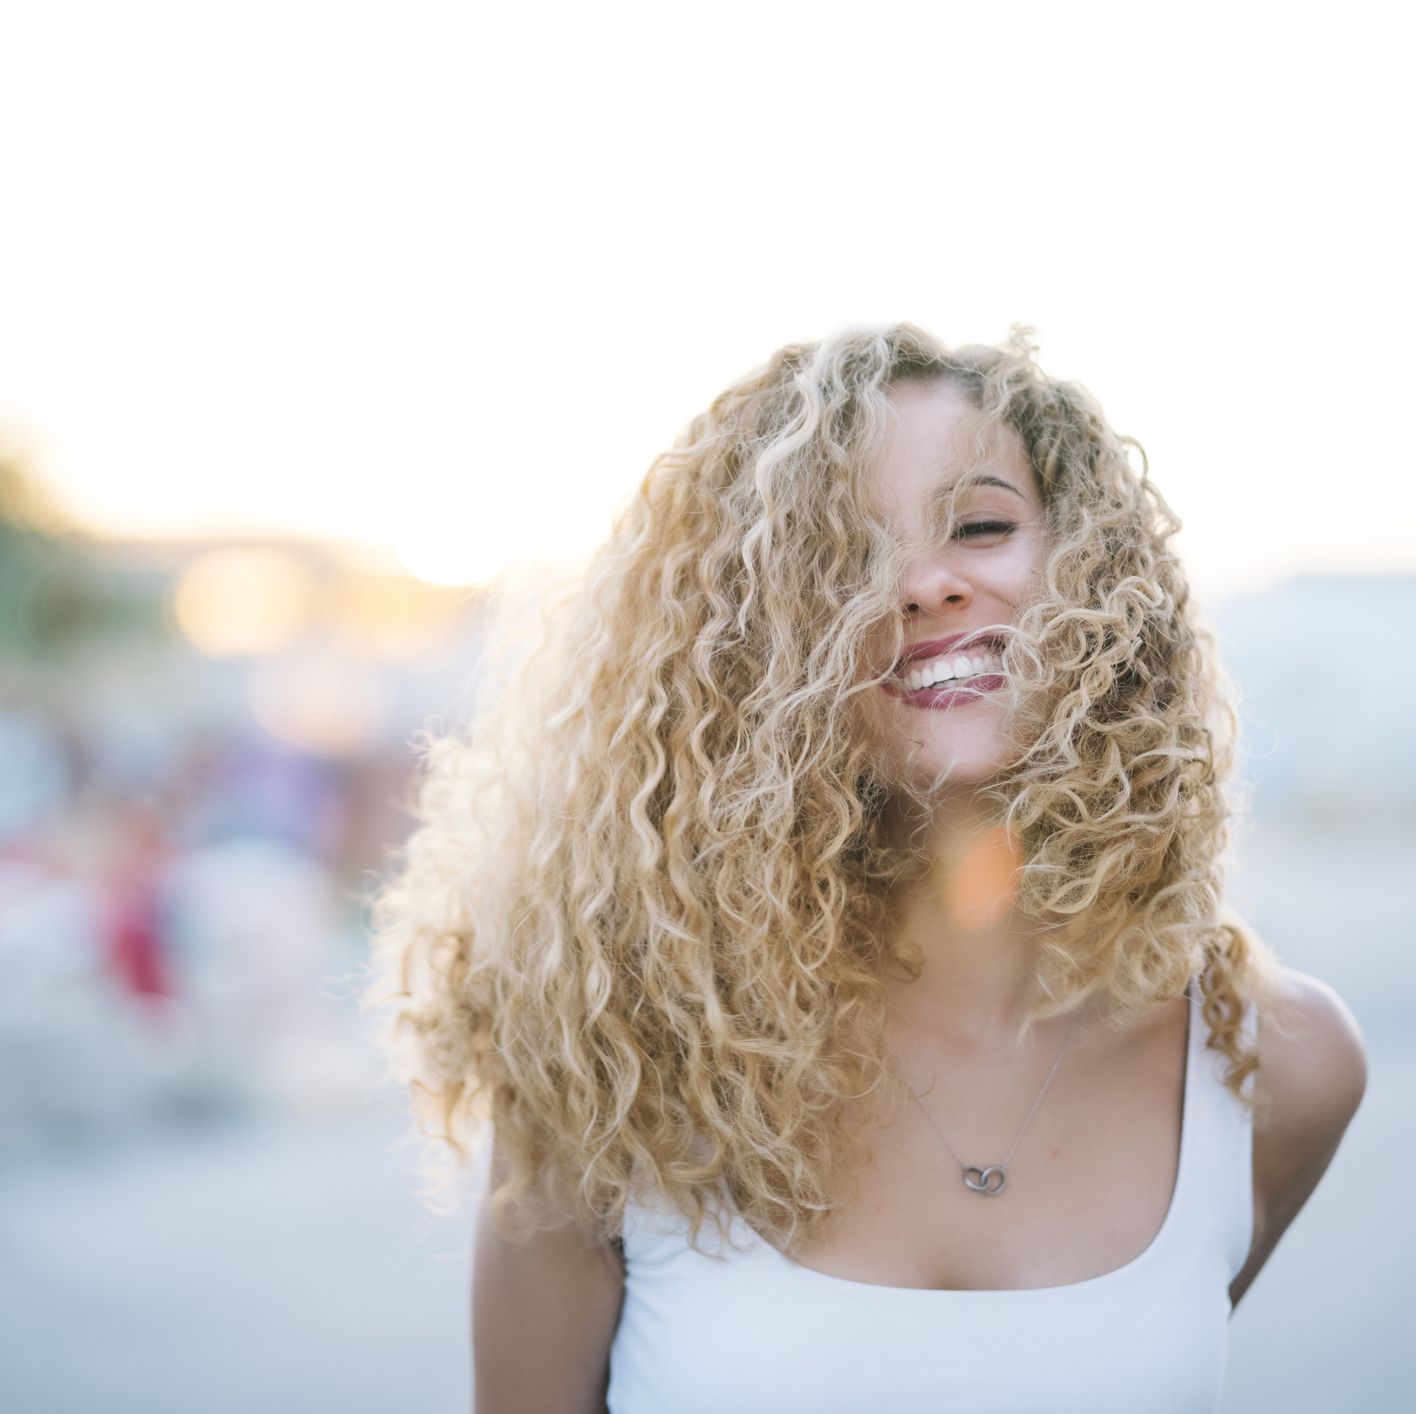 portrait of happy young woman with blond ringlets